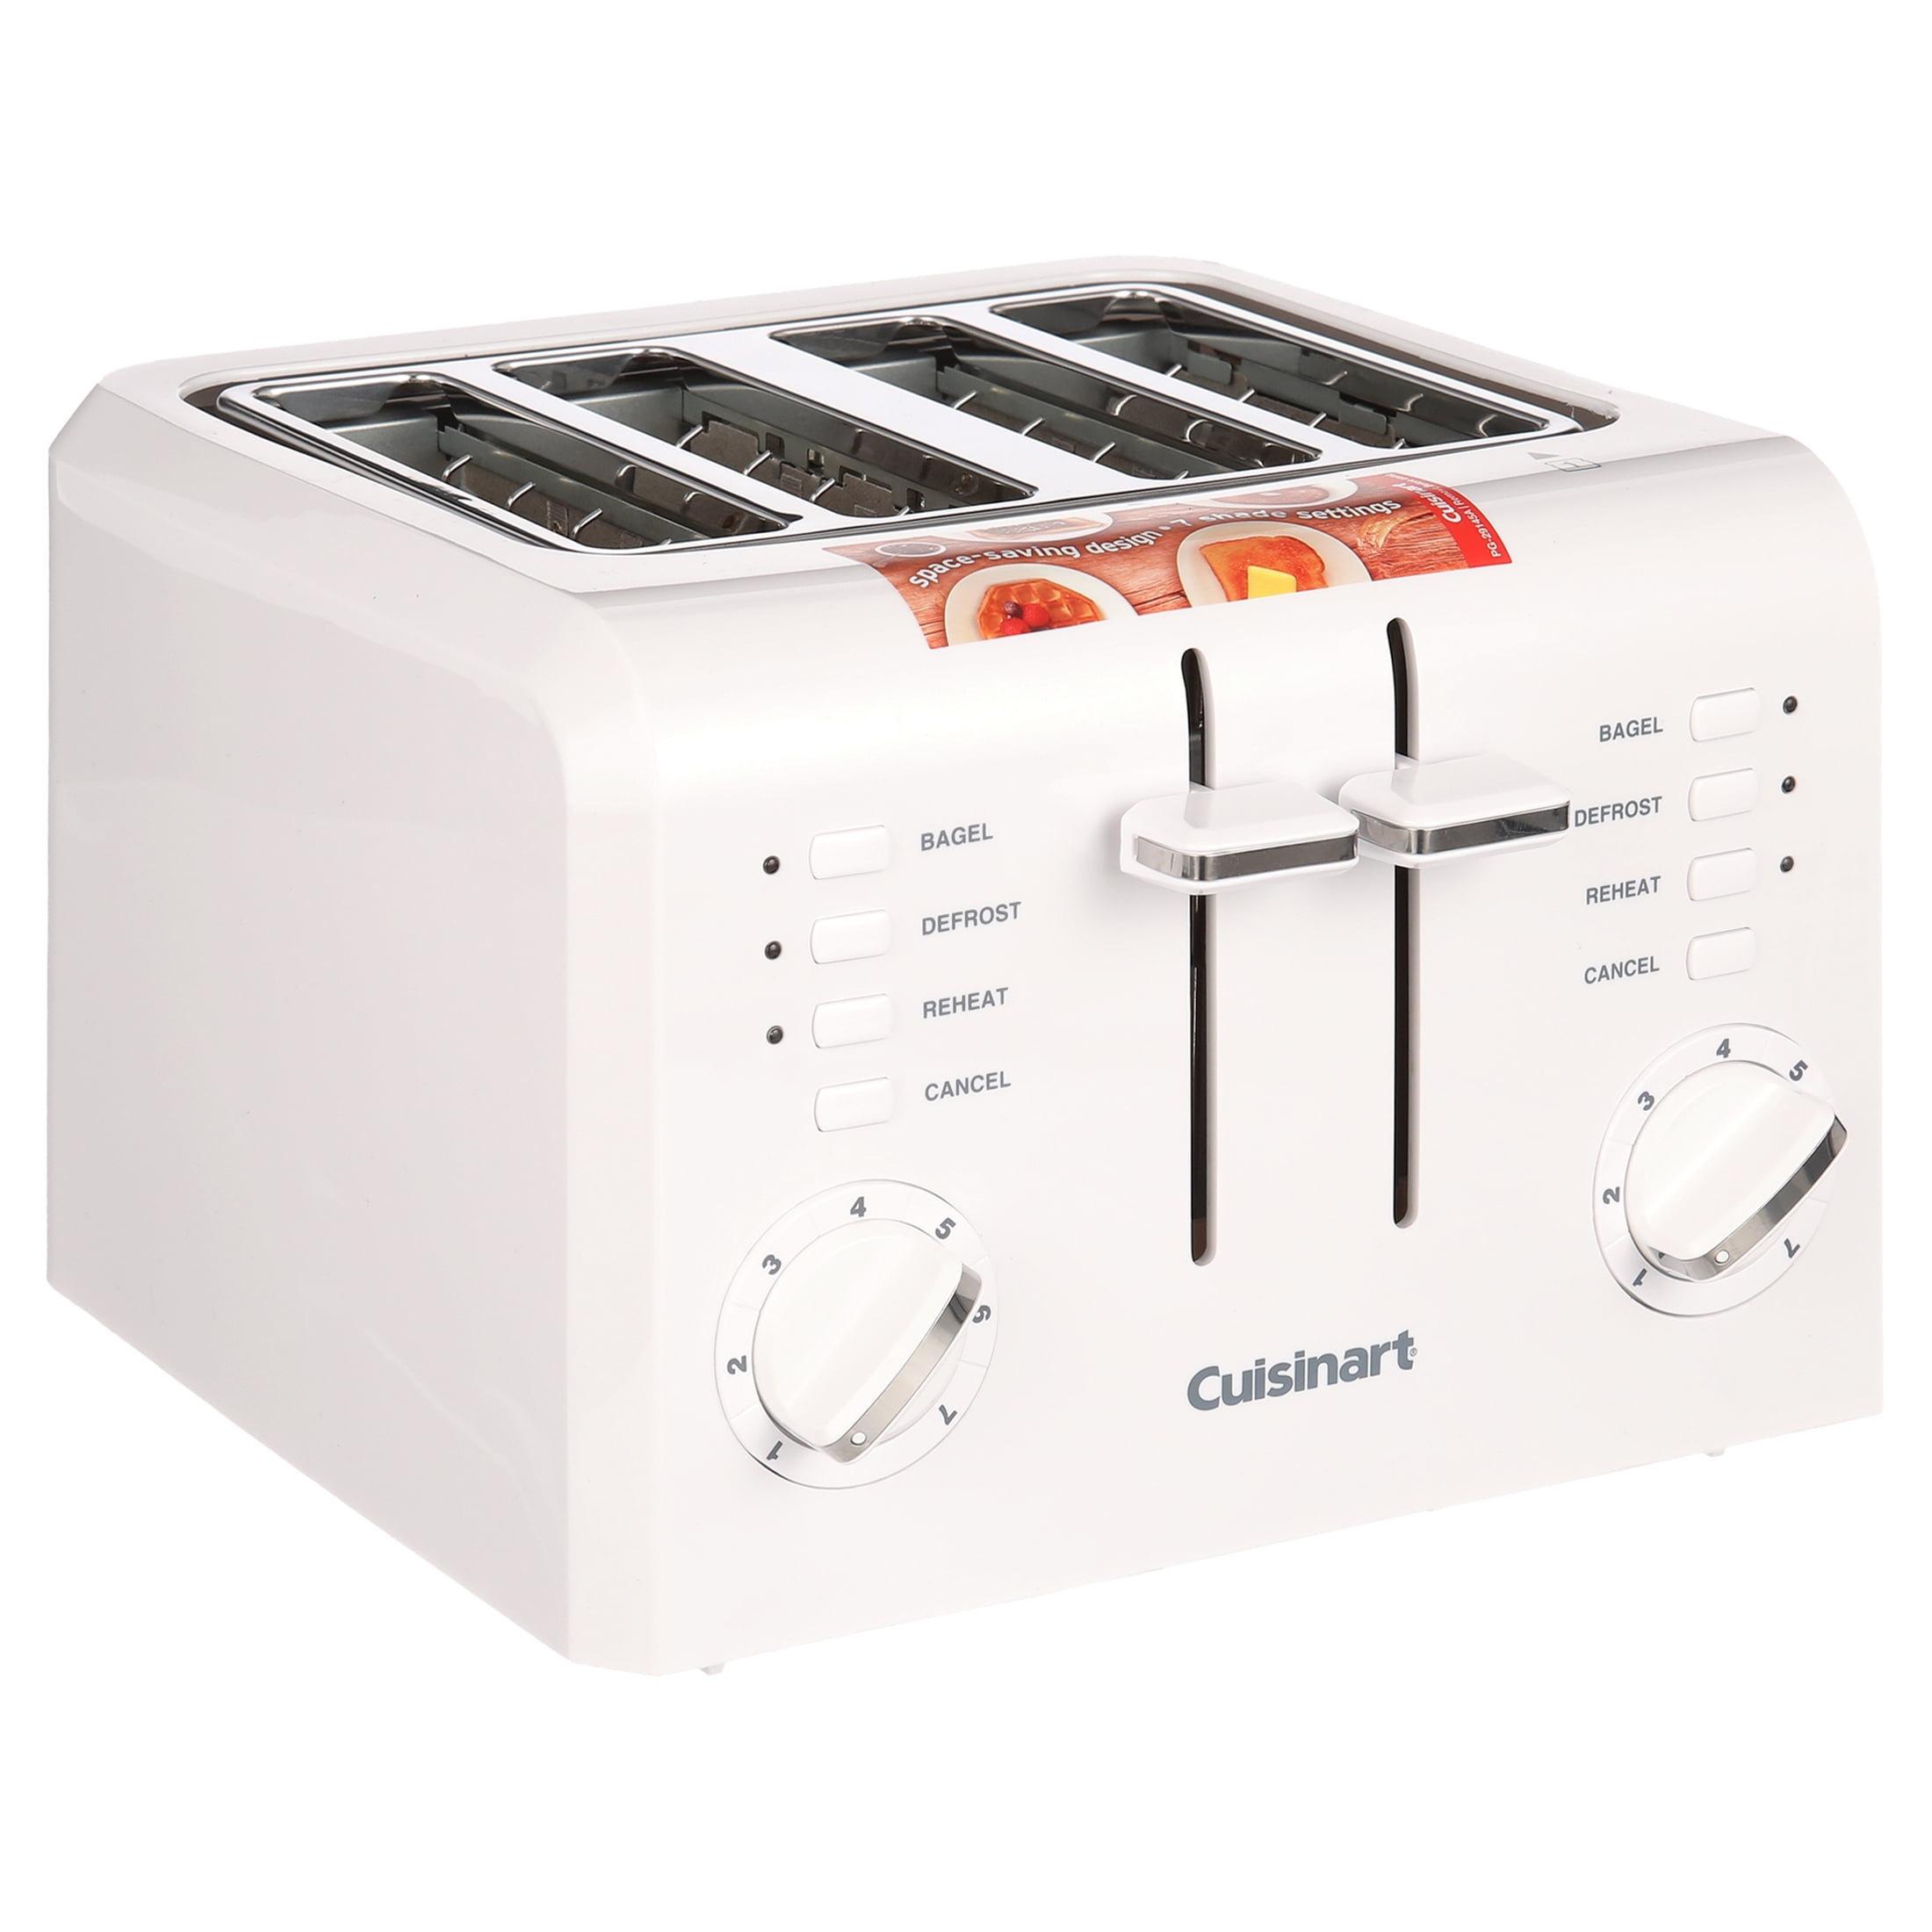 Cuisinart CPT-142BK 4 Slice Compact Toaster - Macy's